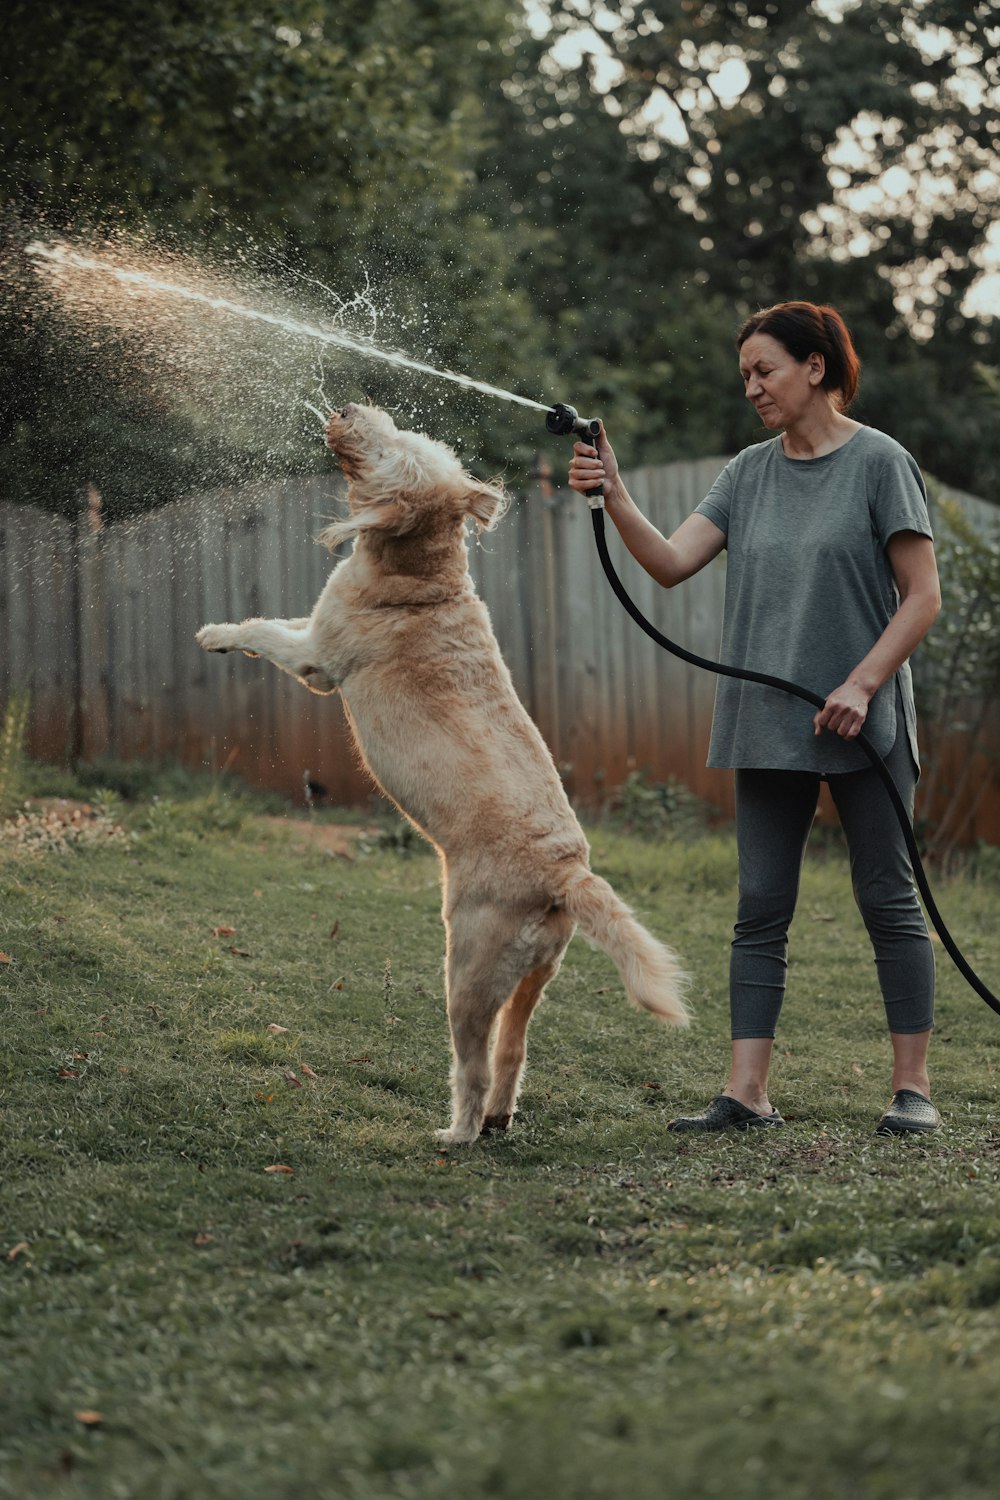 a woman is spraying a dog with a hose